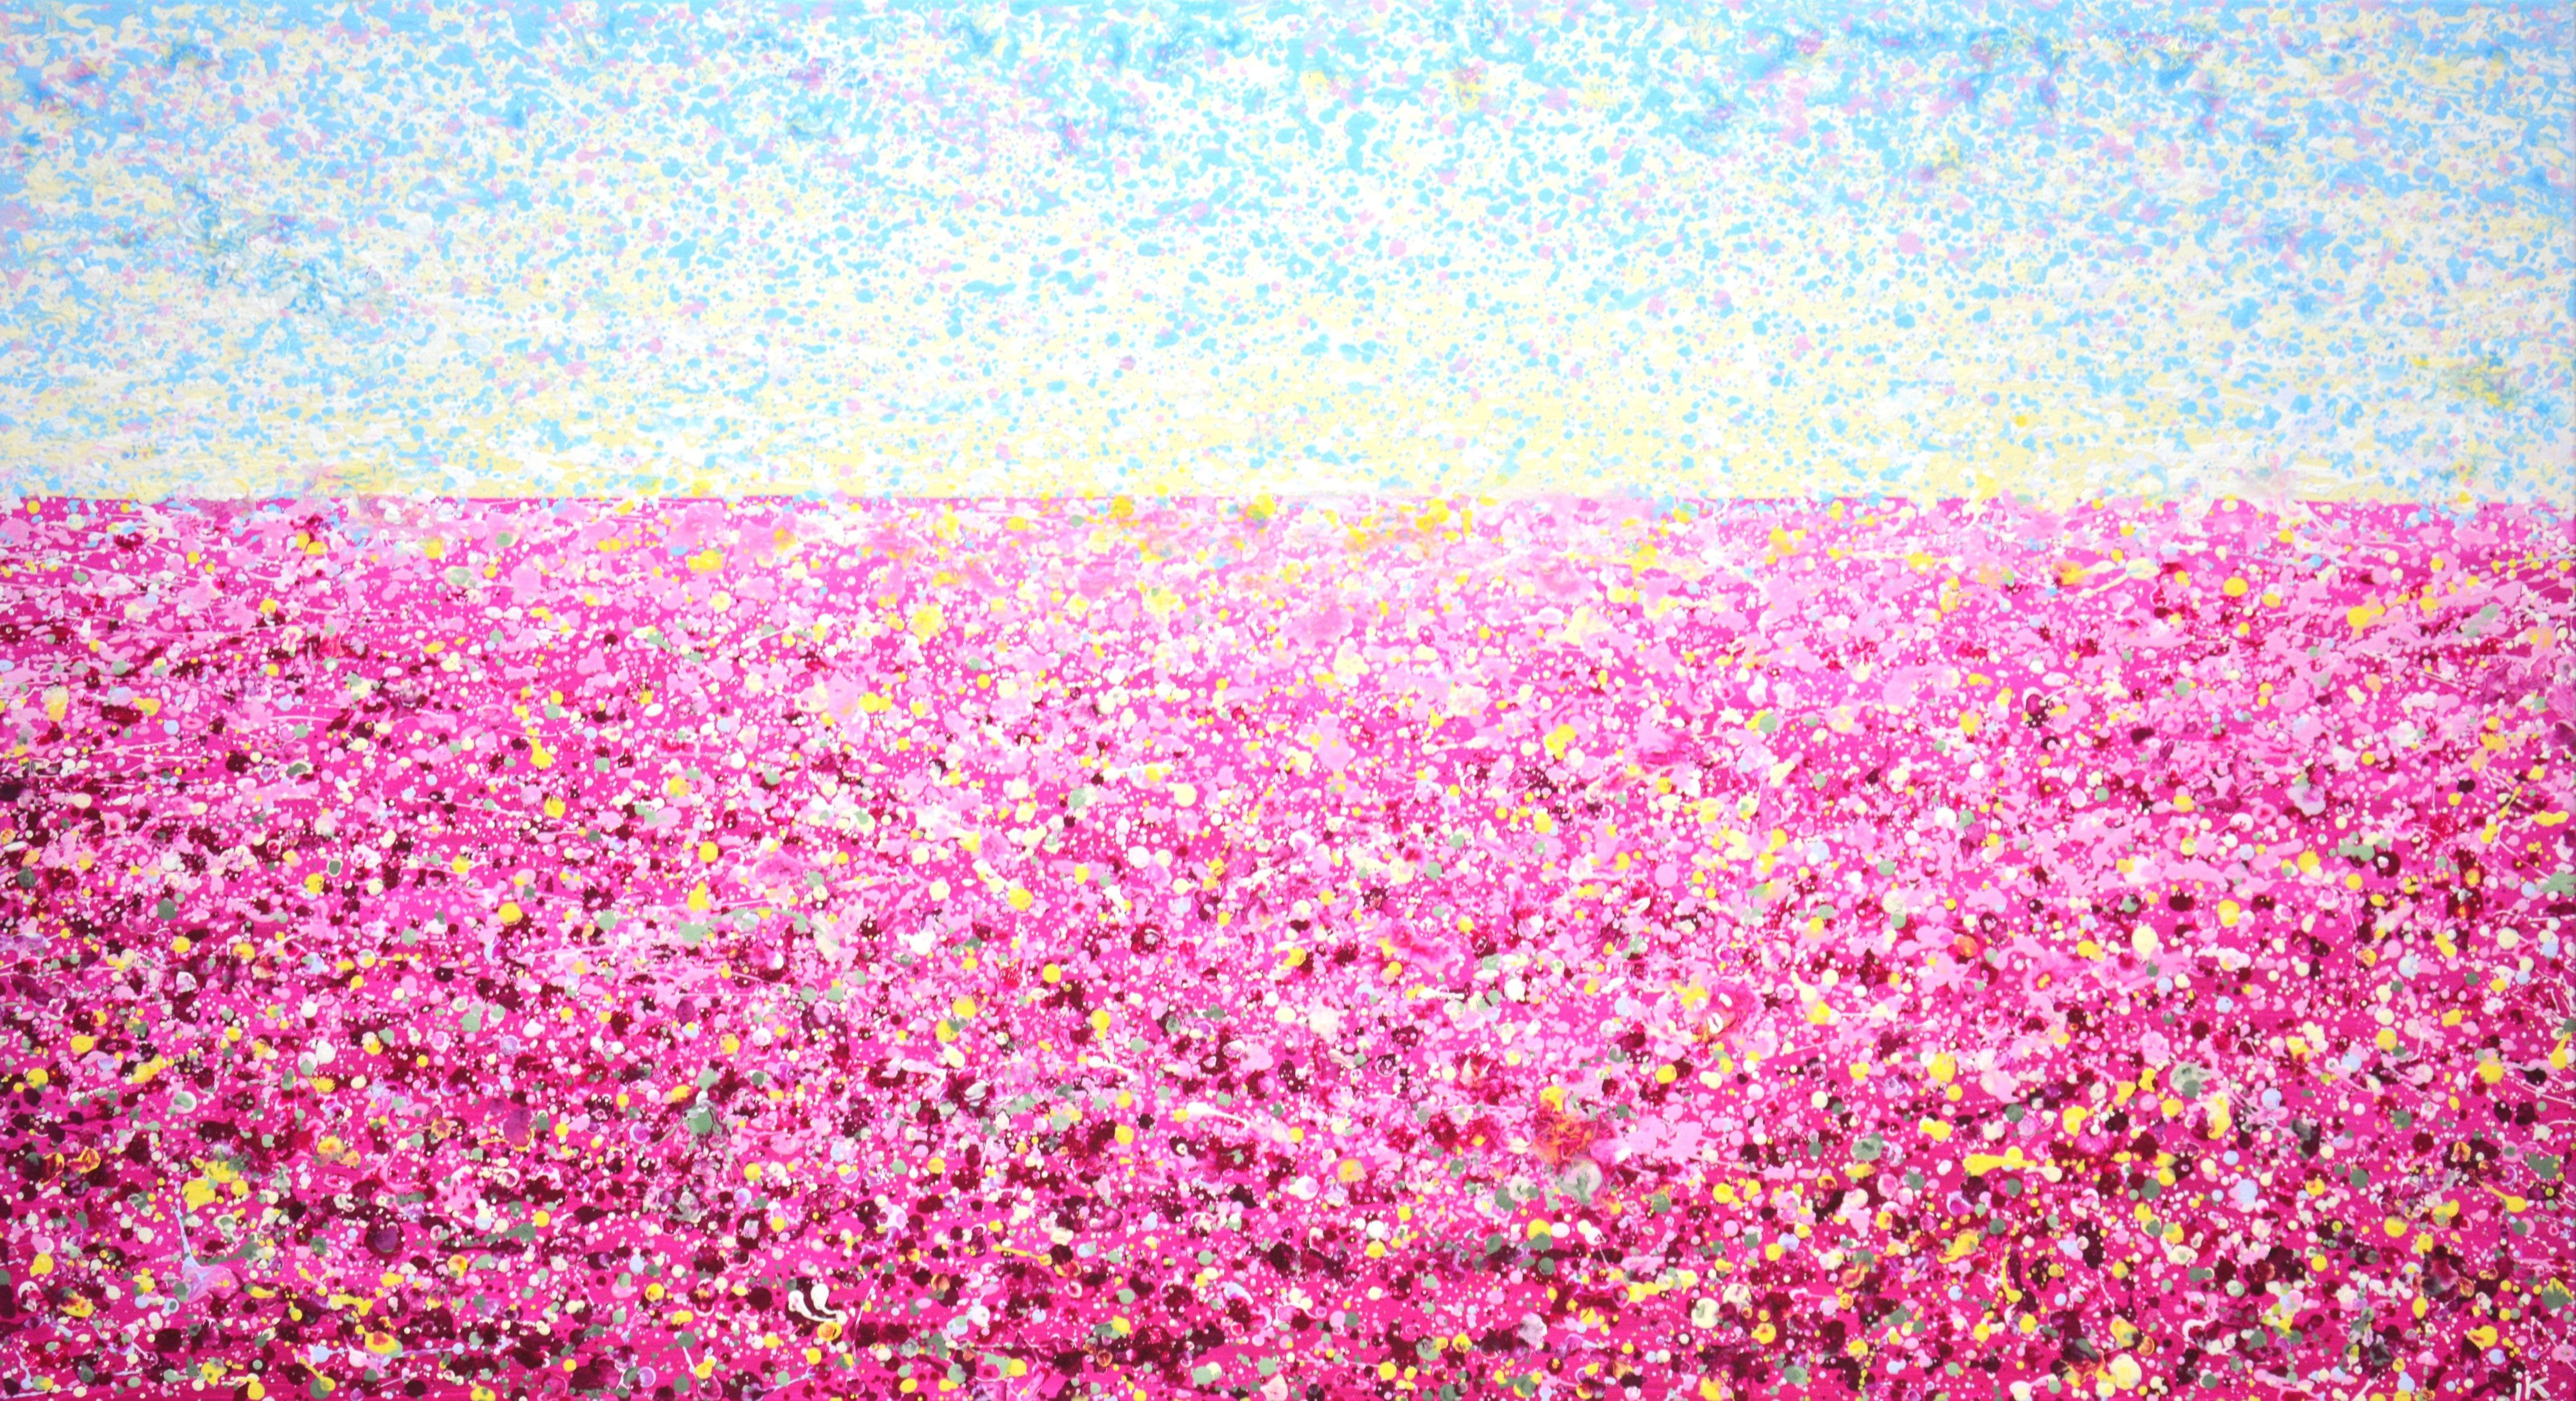 Pink ... Modern, expressive, landscape with a pink flower field. A painting created with dripping and splashing paint that sparkles and shimmers! Lots of pink, yellow, dark pink, light blue, white drops on a pink background.  The picture is of good